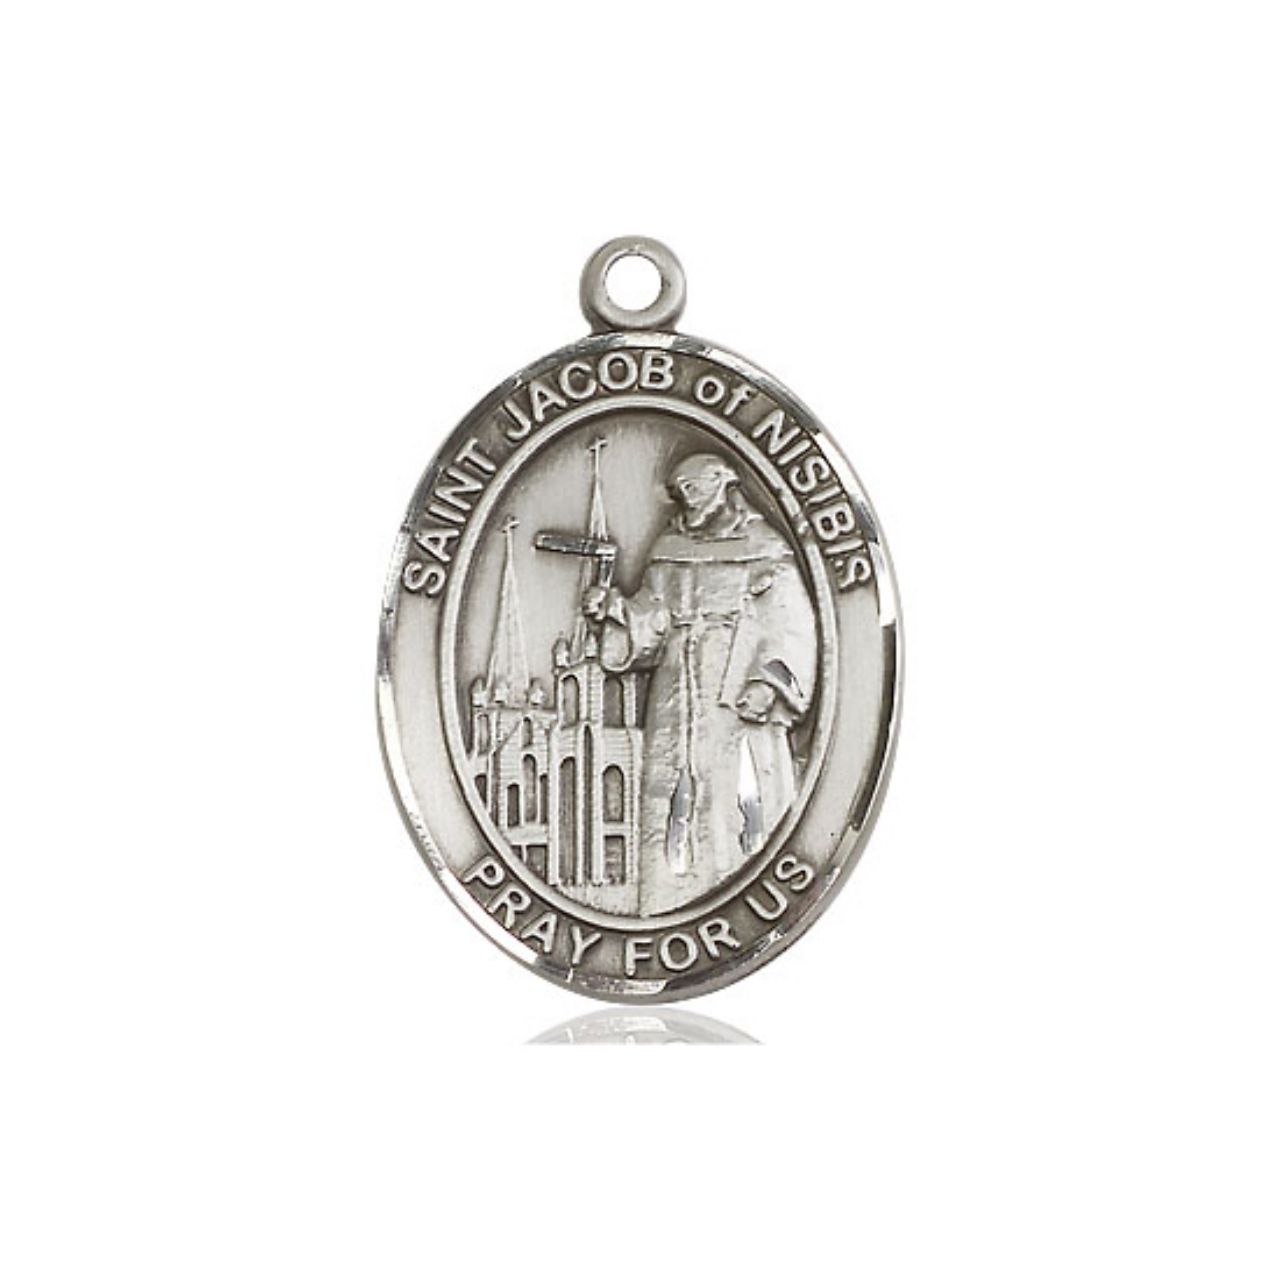 St. Jacob of Nisibis Medal - Sterling Silver Oval Pendant (3 Sizes)